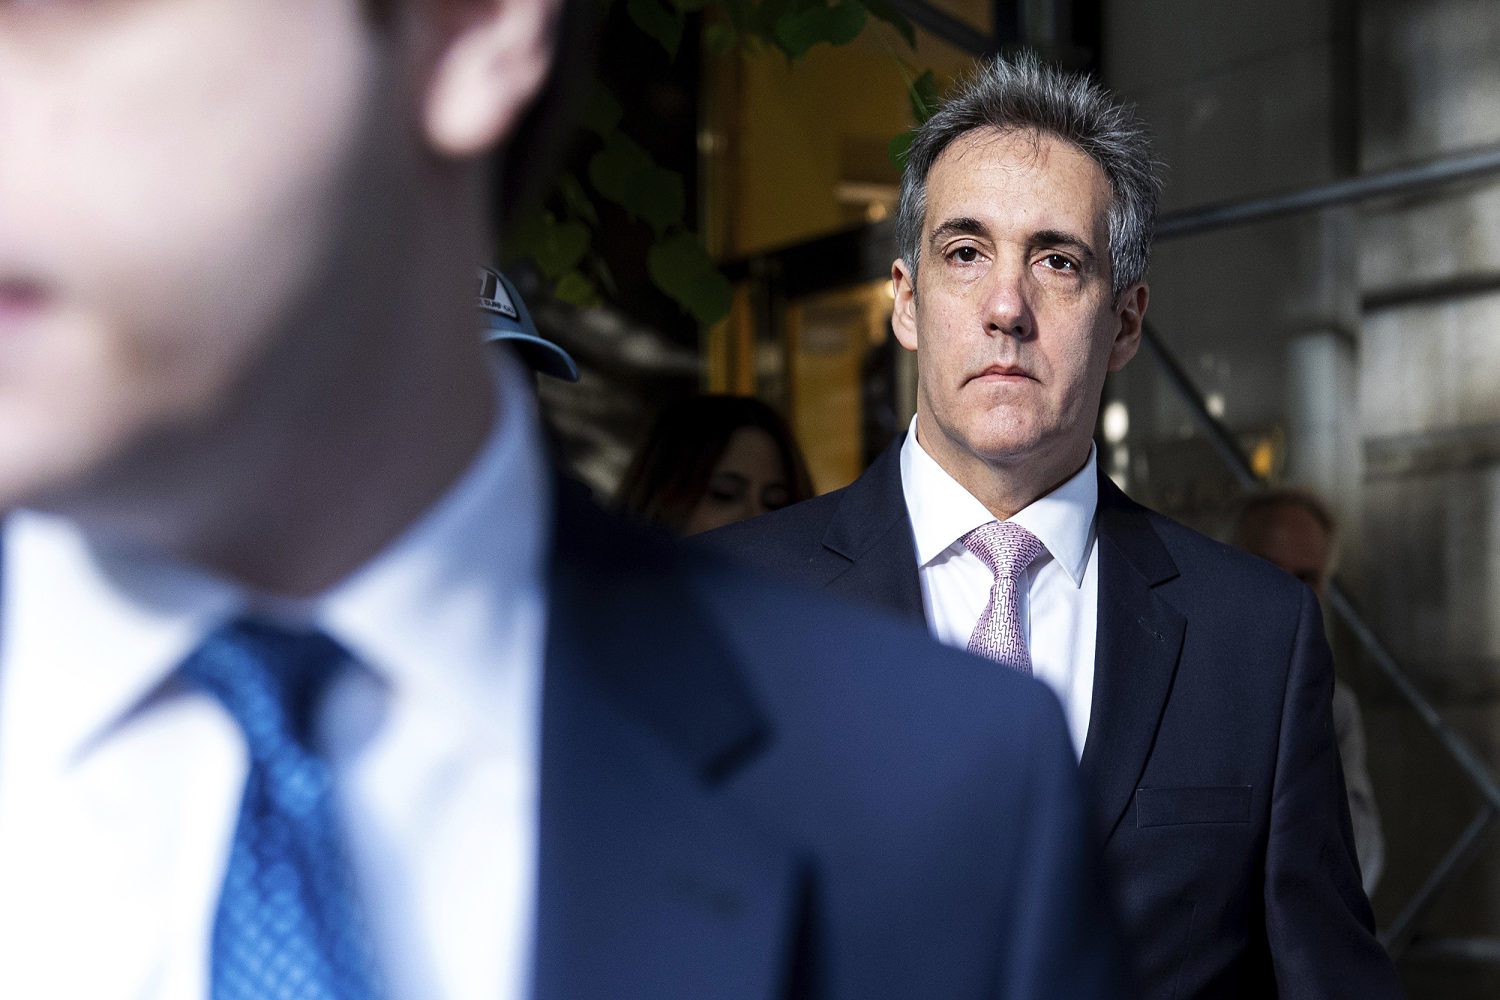 Michael Cohen set to take the stand as star witness in Trump's hush money trial